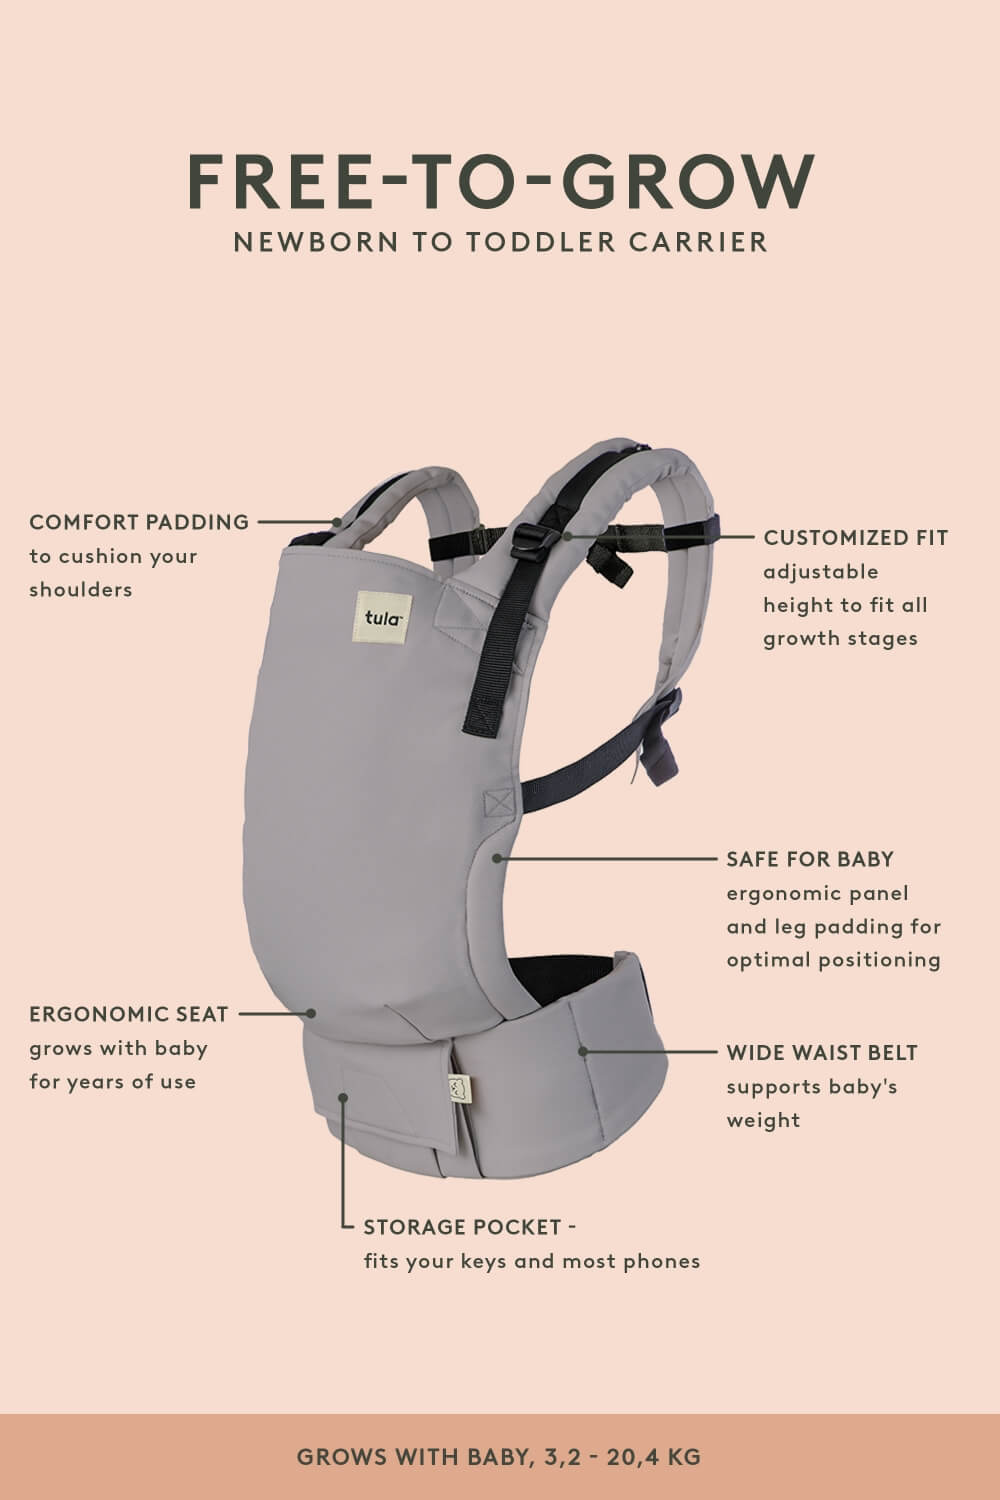 Soar - Free-to-Grow Baby Carrier